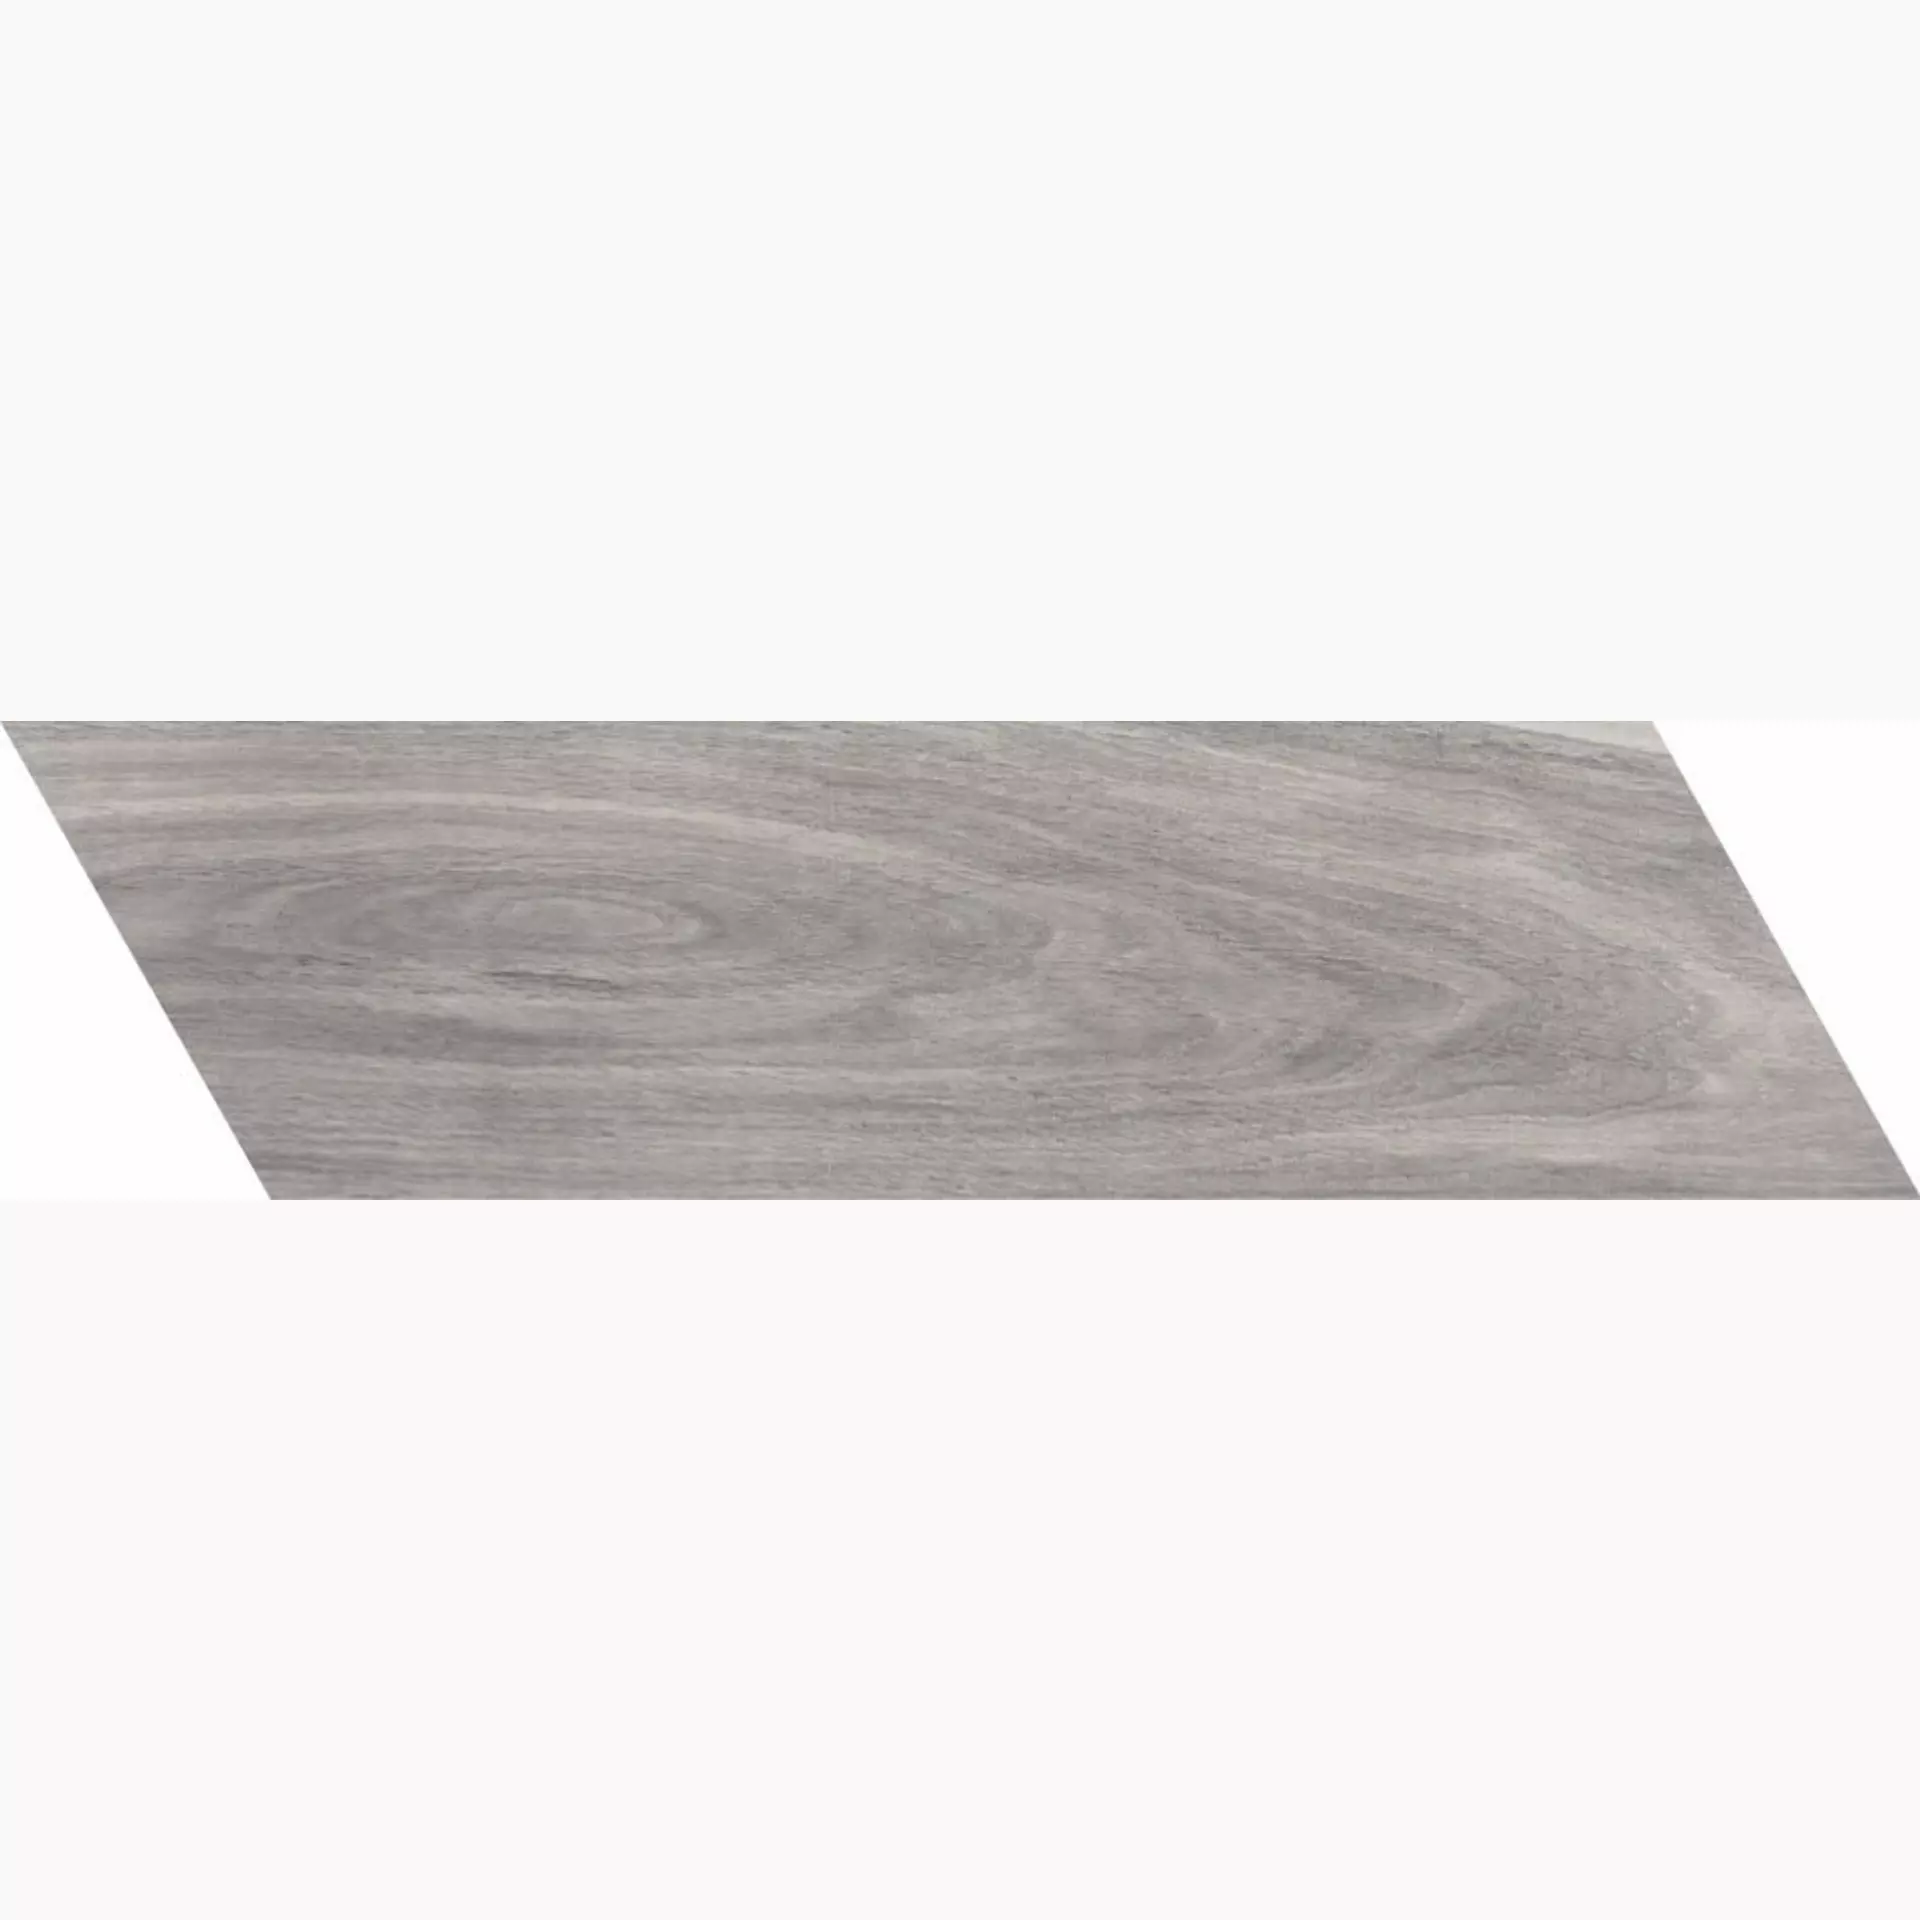 ABK Soleras Grigio Naturale French Pattern S1R4911A 20x80cm rectified 8,5mm